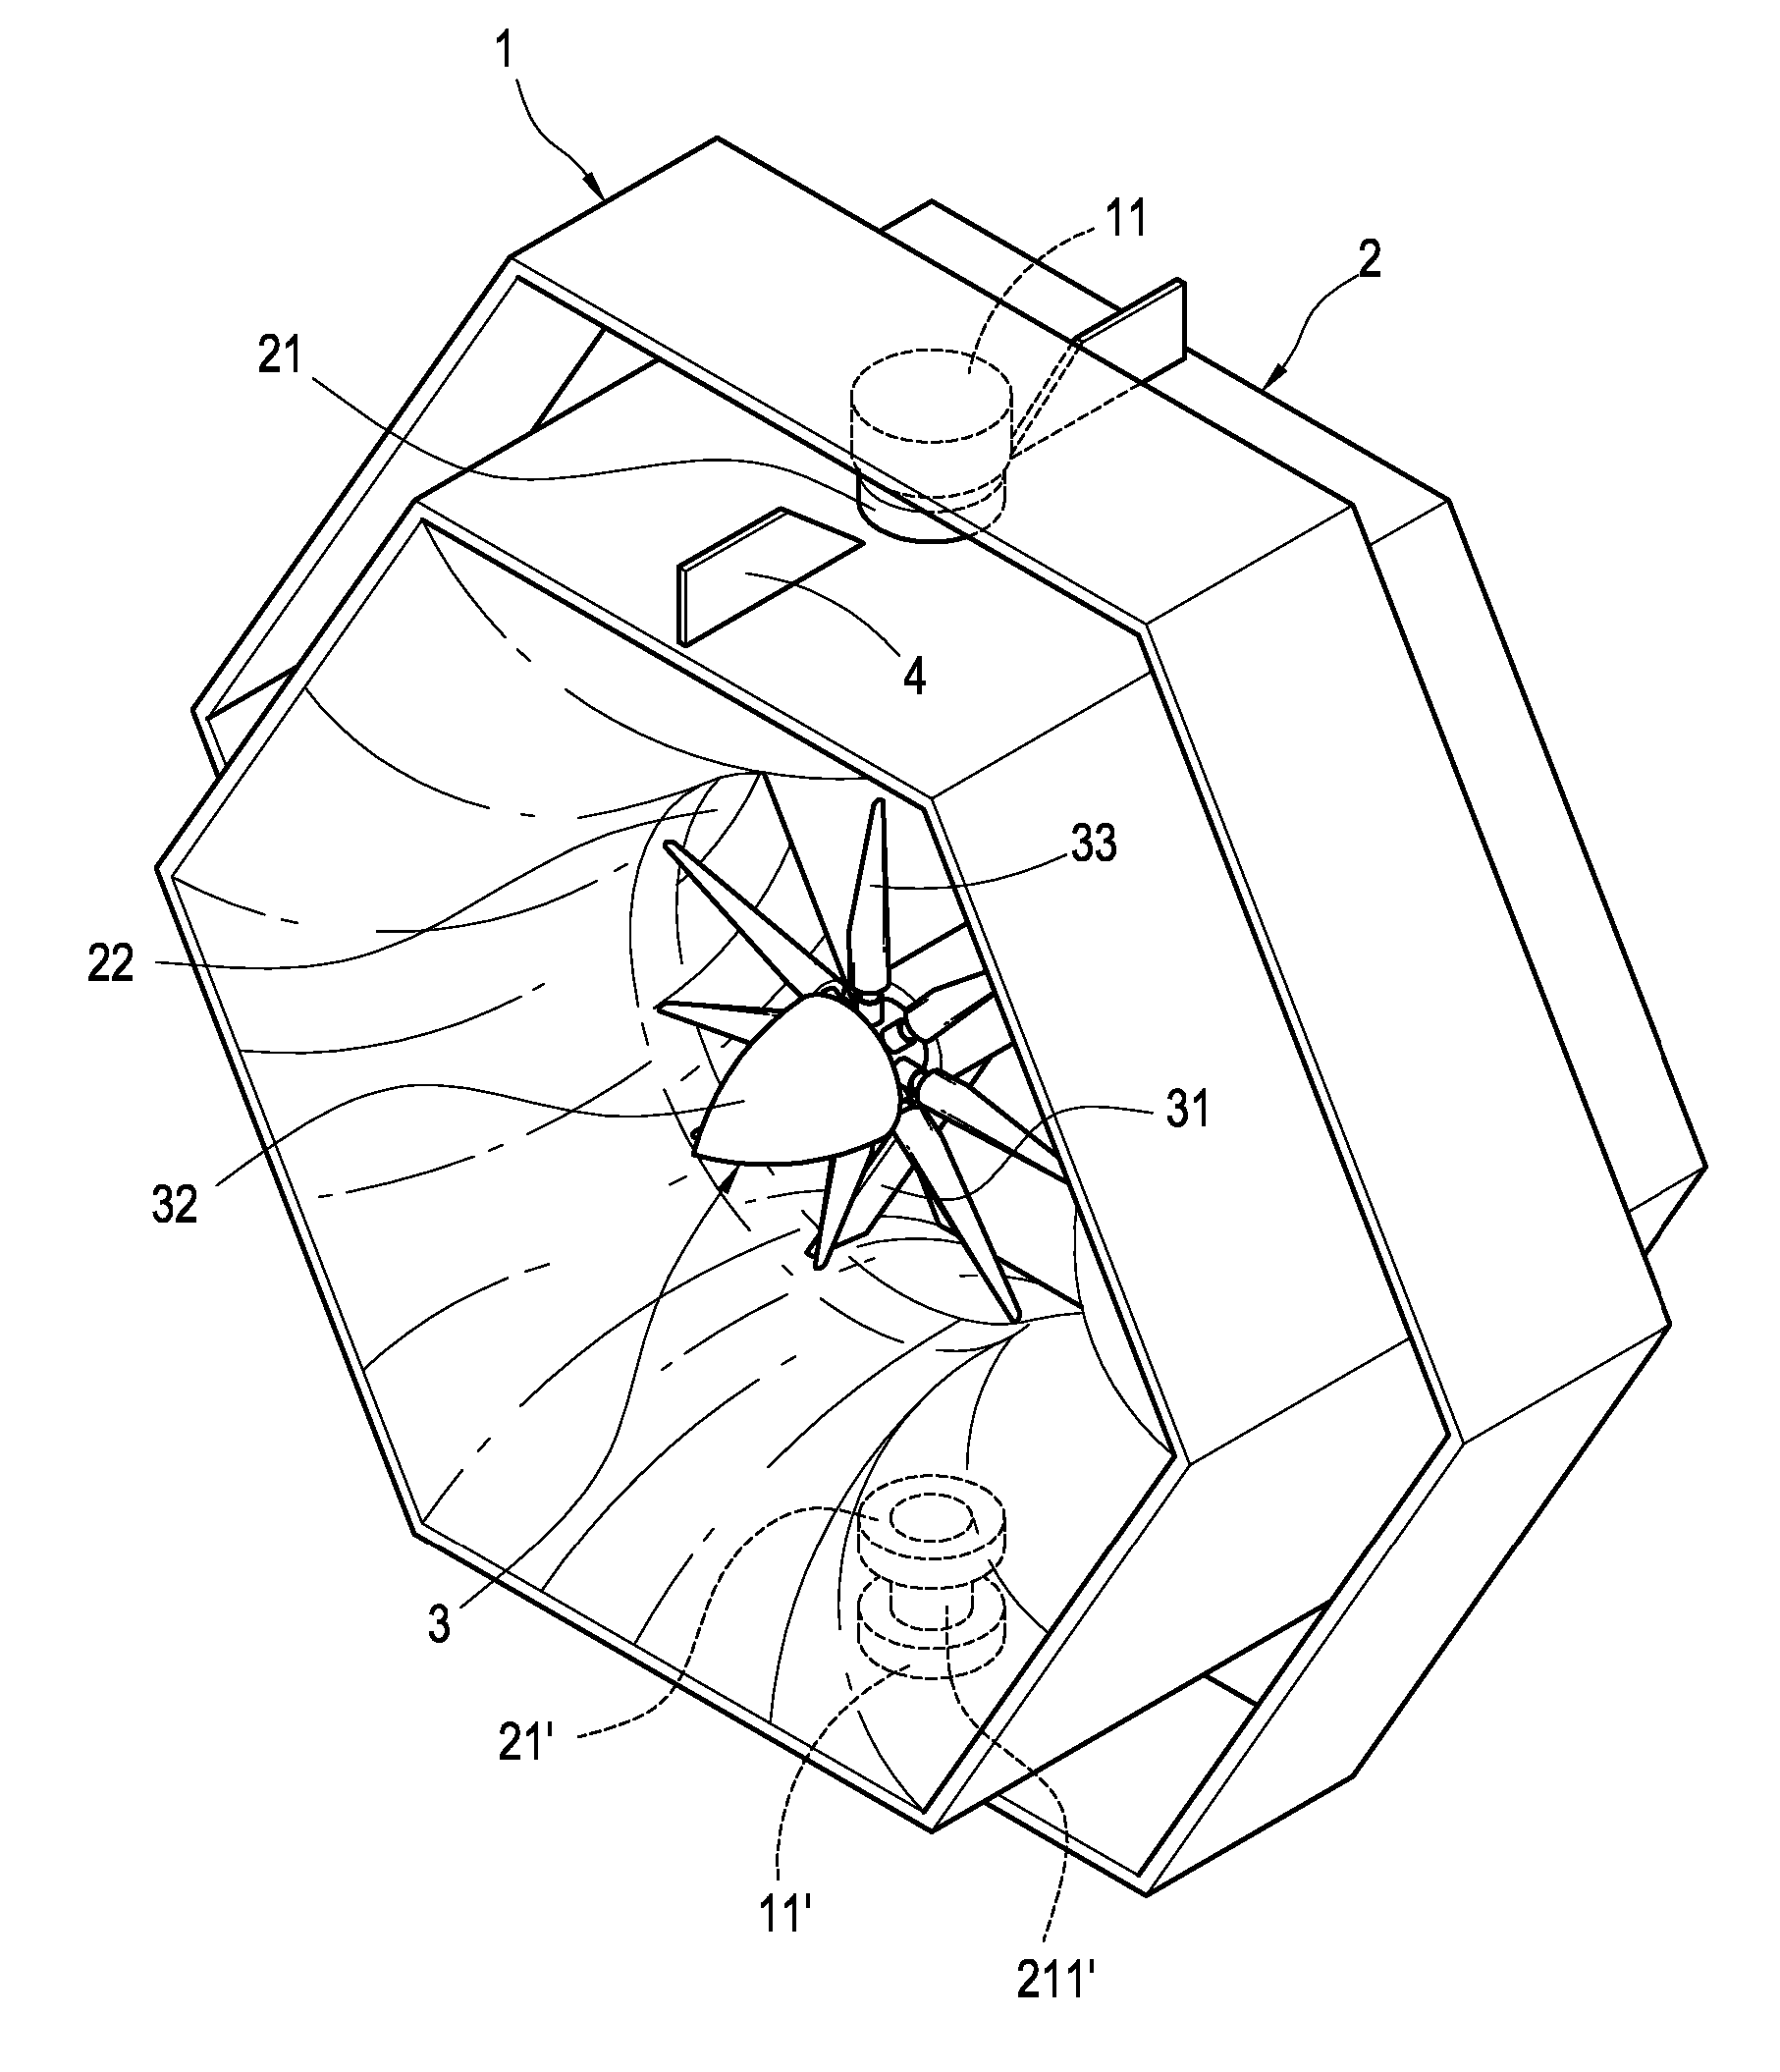 Wind Guiding Hood Structure For Wind Power Generation